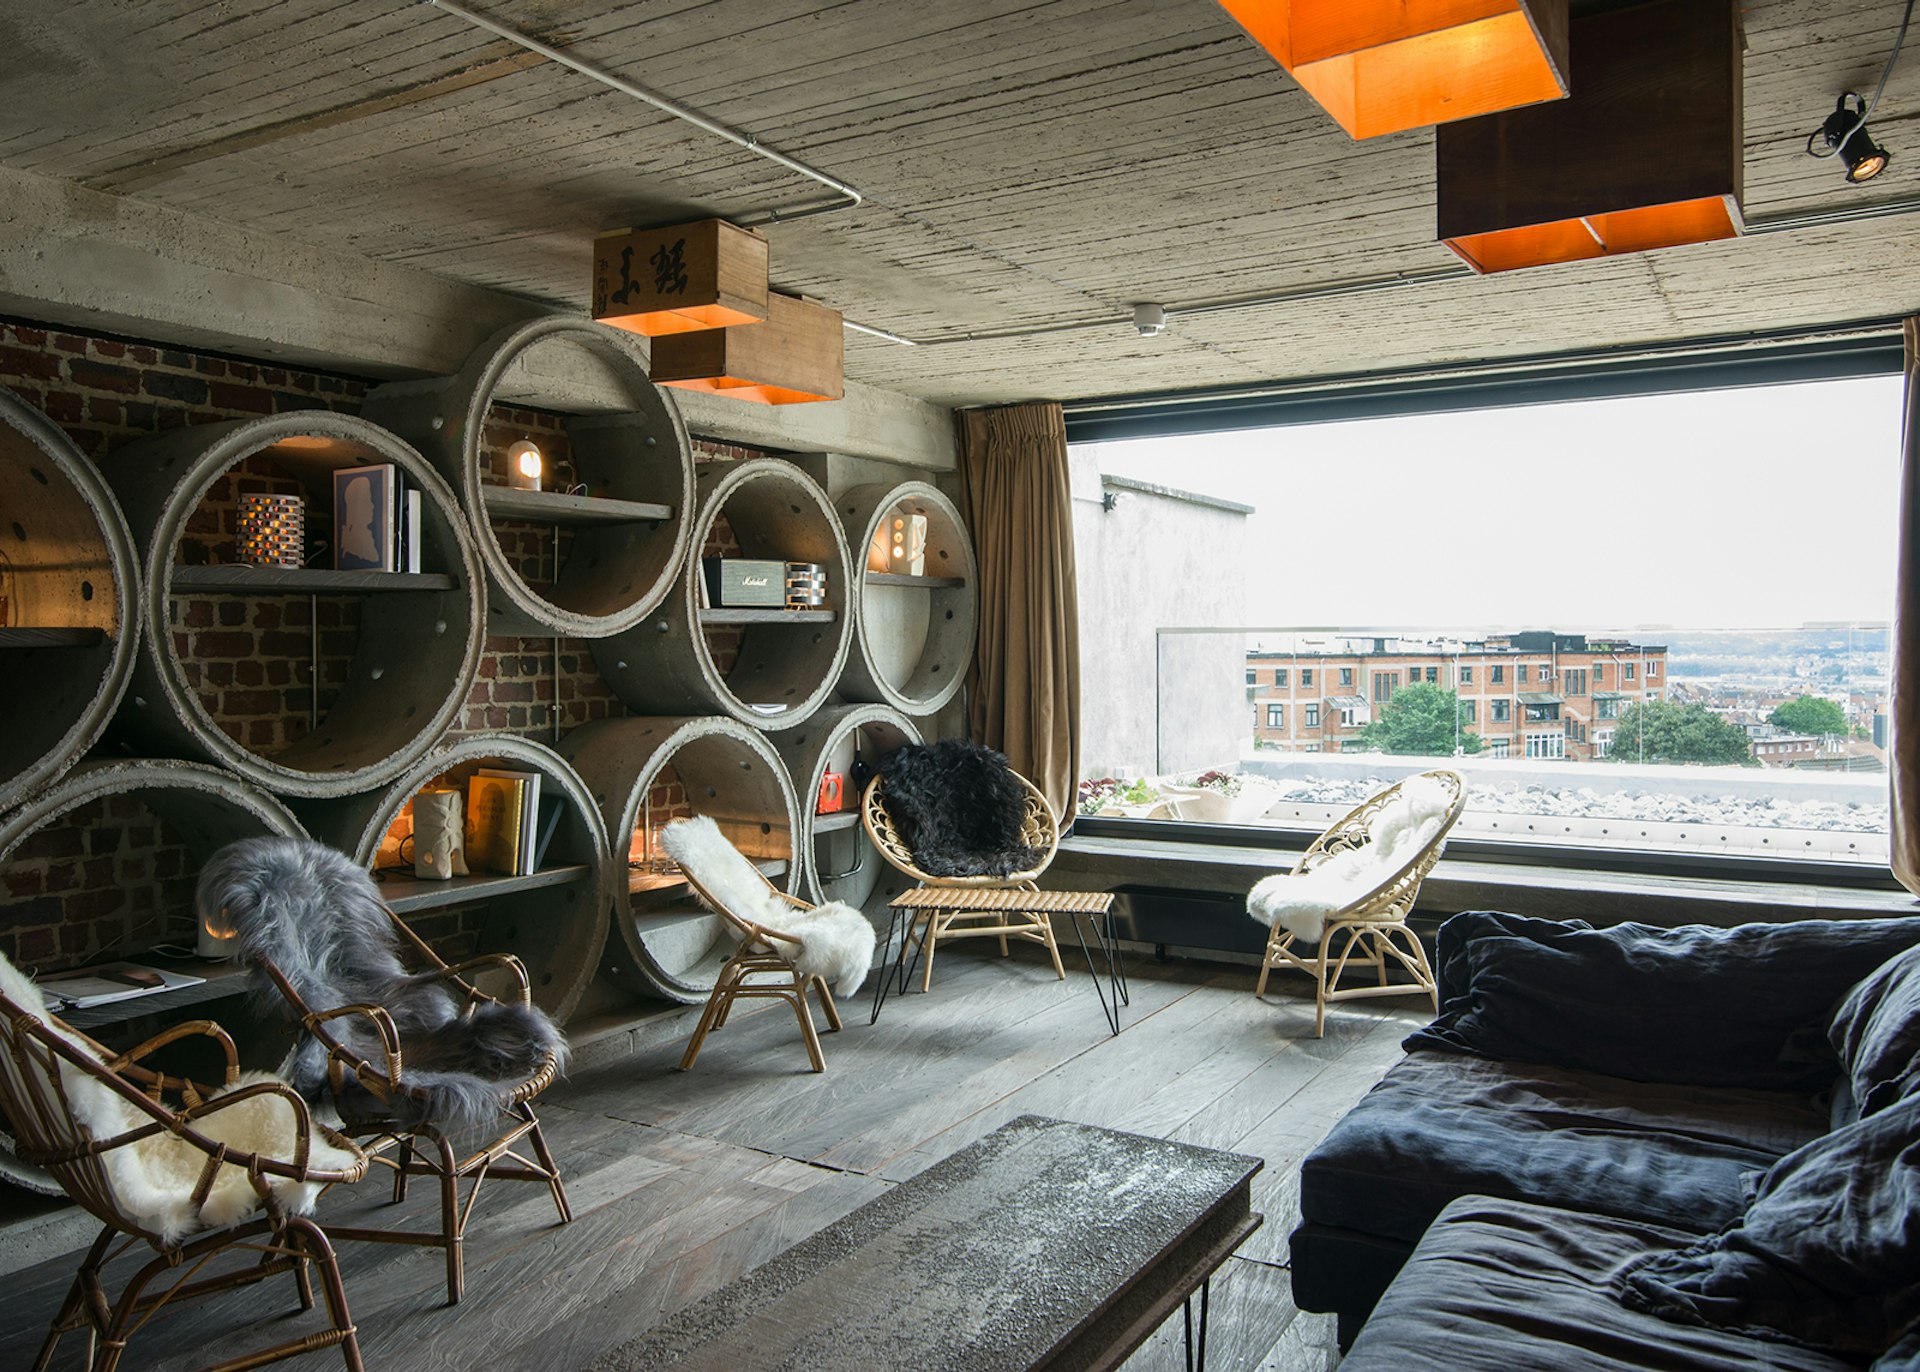 New places to stay - A communal room in the Jam Hotel © Jam Hotel